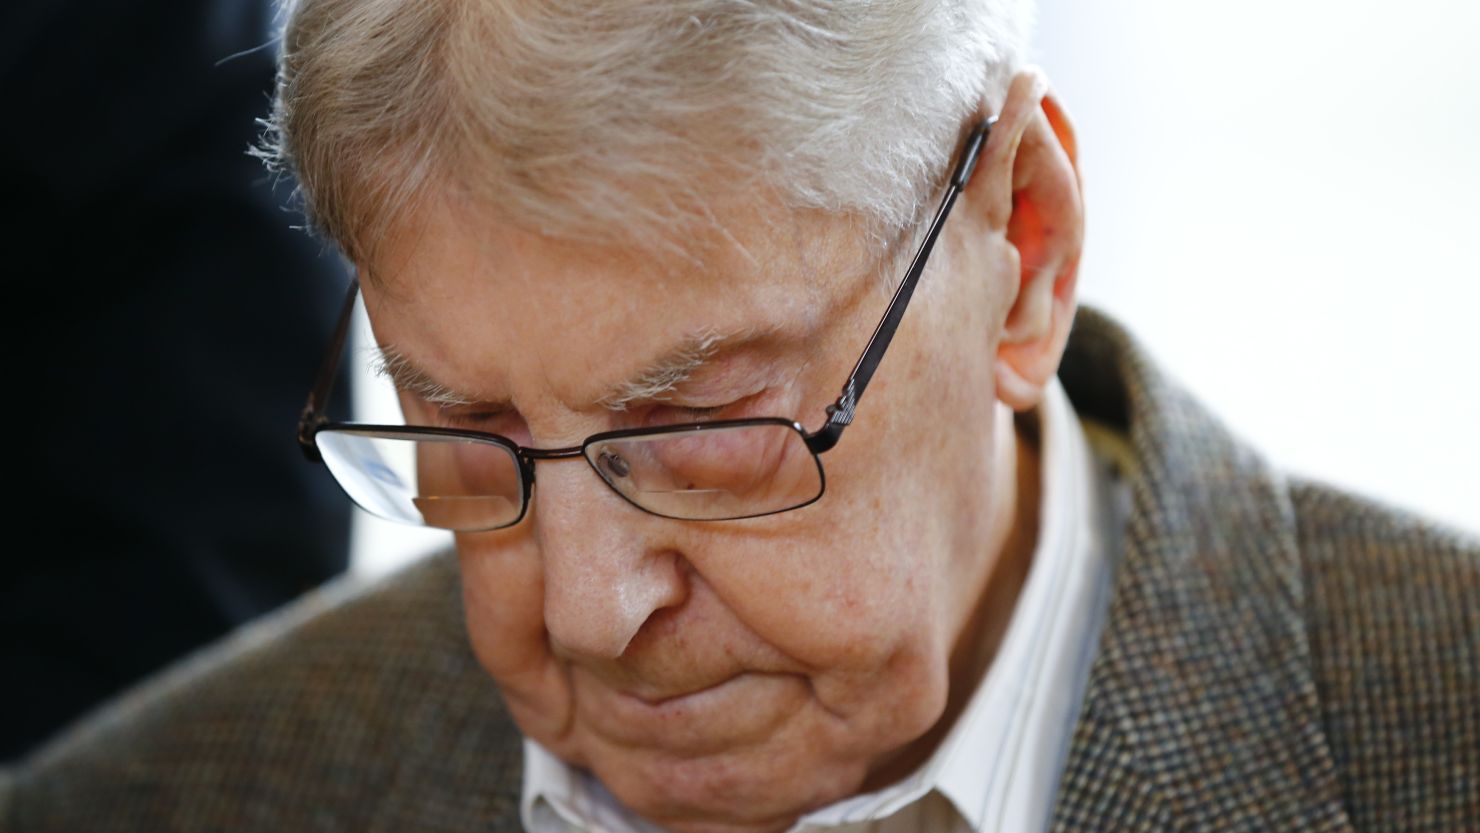 Former Auschwitz guard Reinhold Hanning, 94, arrives for his trial at the court in Detmold, Germany.